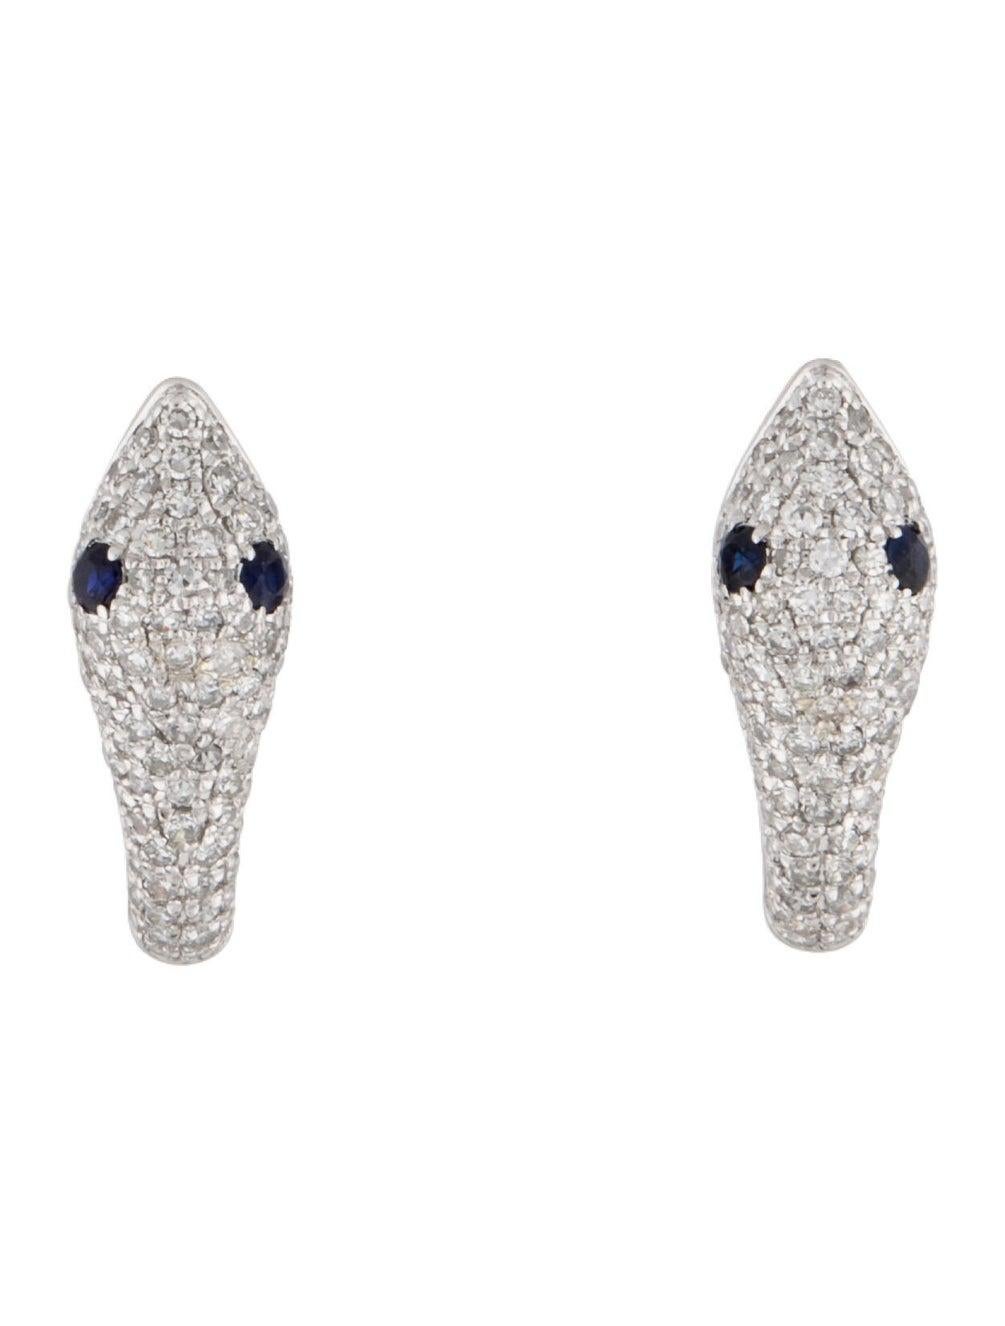 These Stylish and Chic Snake Earrings are crafted of 14K Gold featuring approximately 0.42 cts of round Diamonds & 2 Sapphires weighing 0.14cts Secured with Hinged backs.
-14K Gold
-0.42cts Natural White Diamonds
-0.14cts Sapphire
-Diamond Color